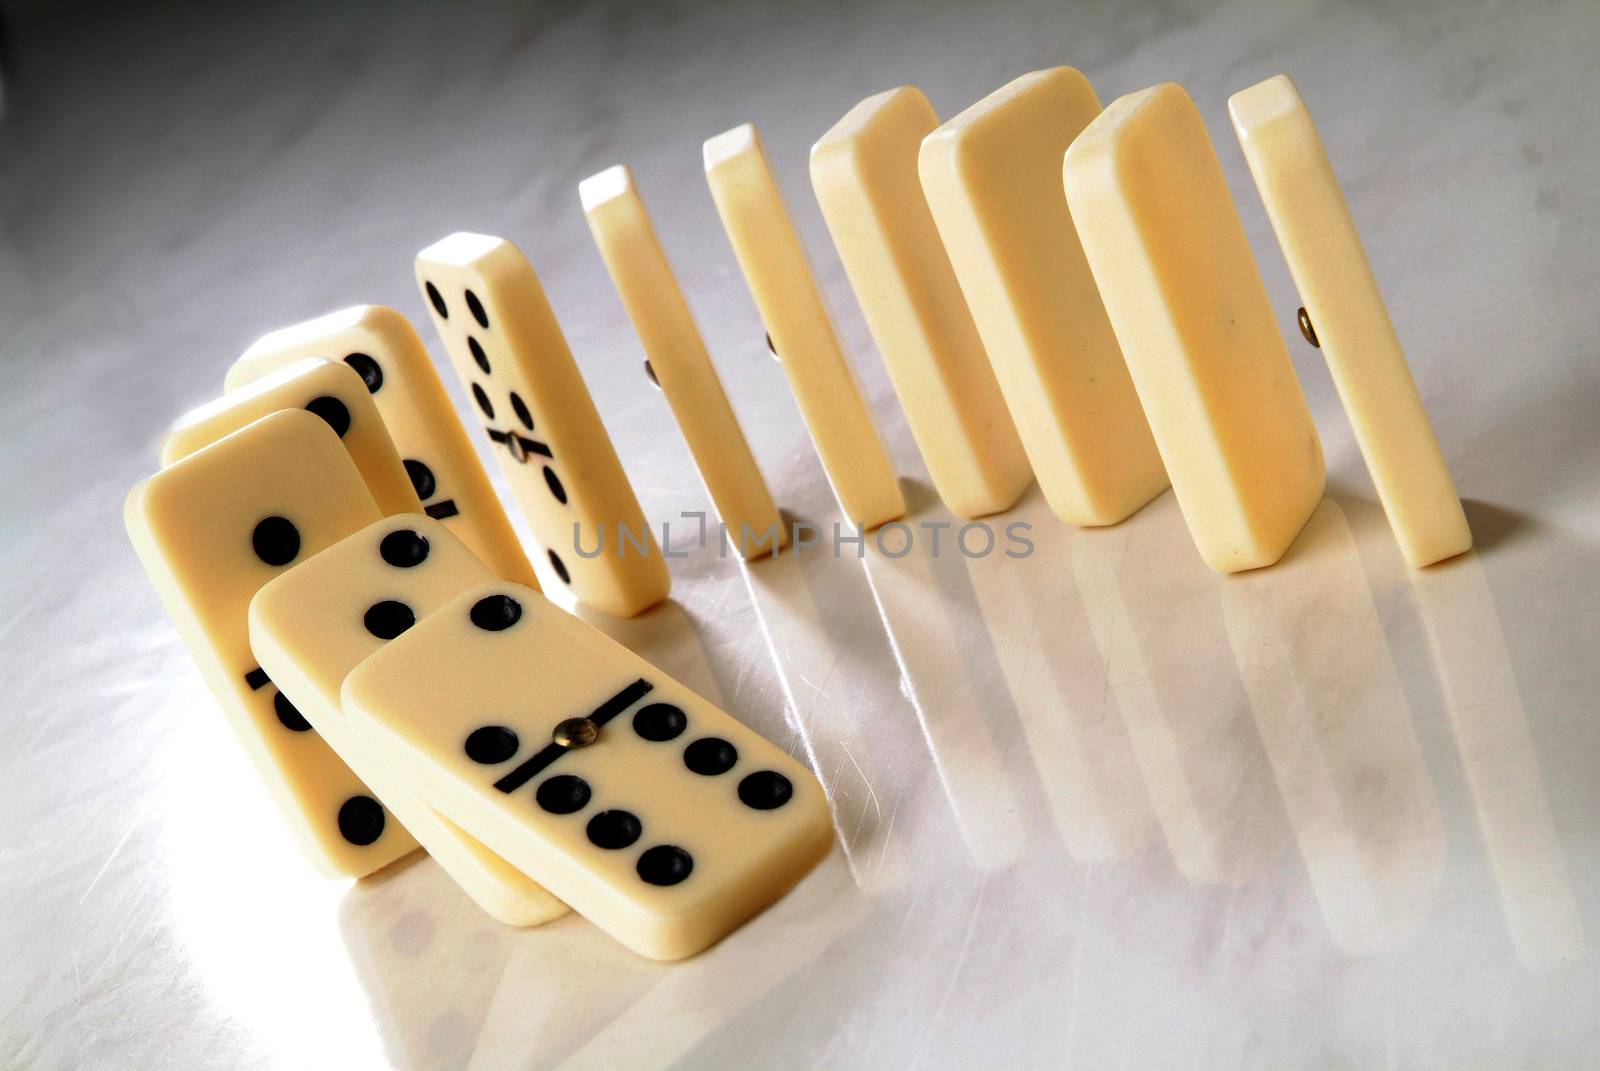 row of dominoes in a semicircle shape on a neutral background